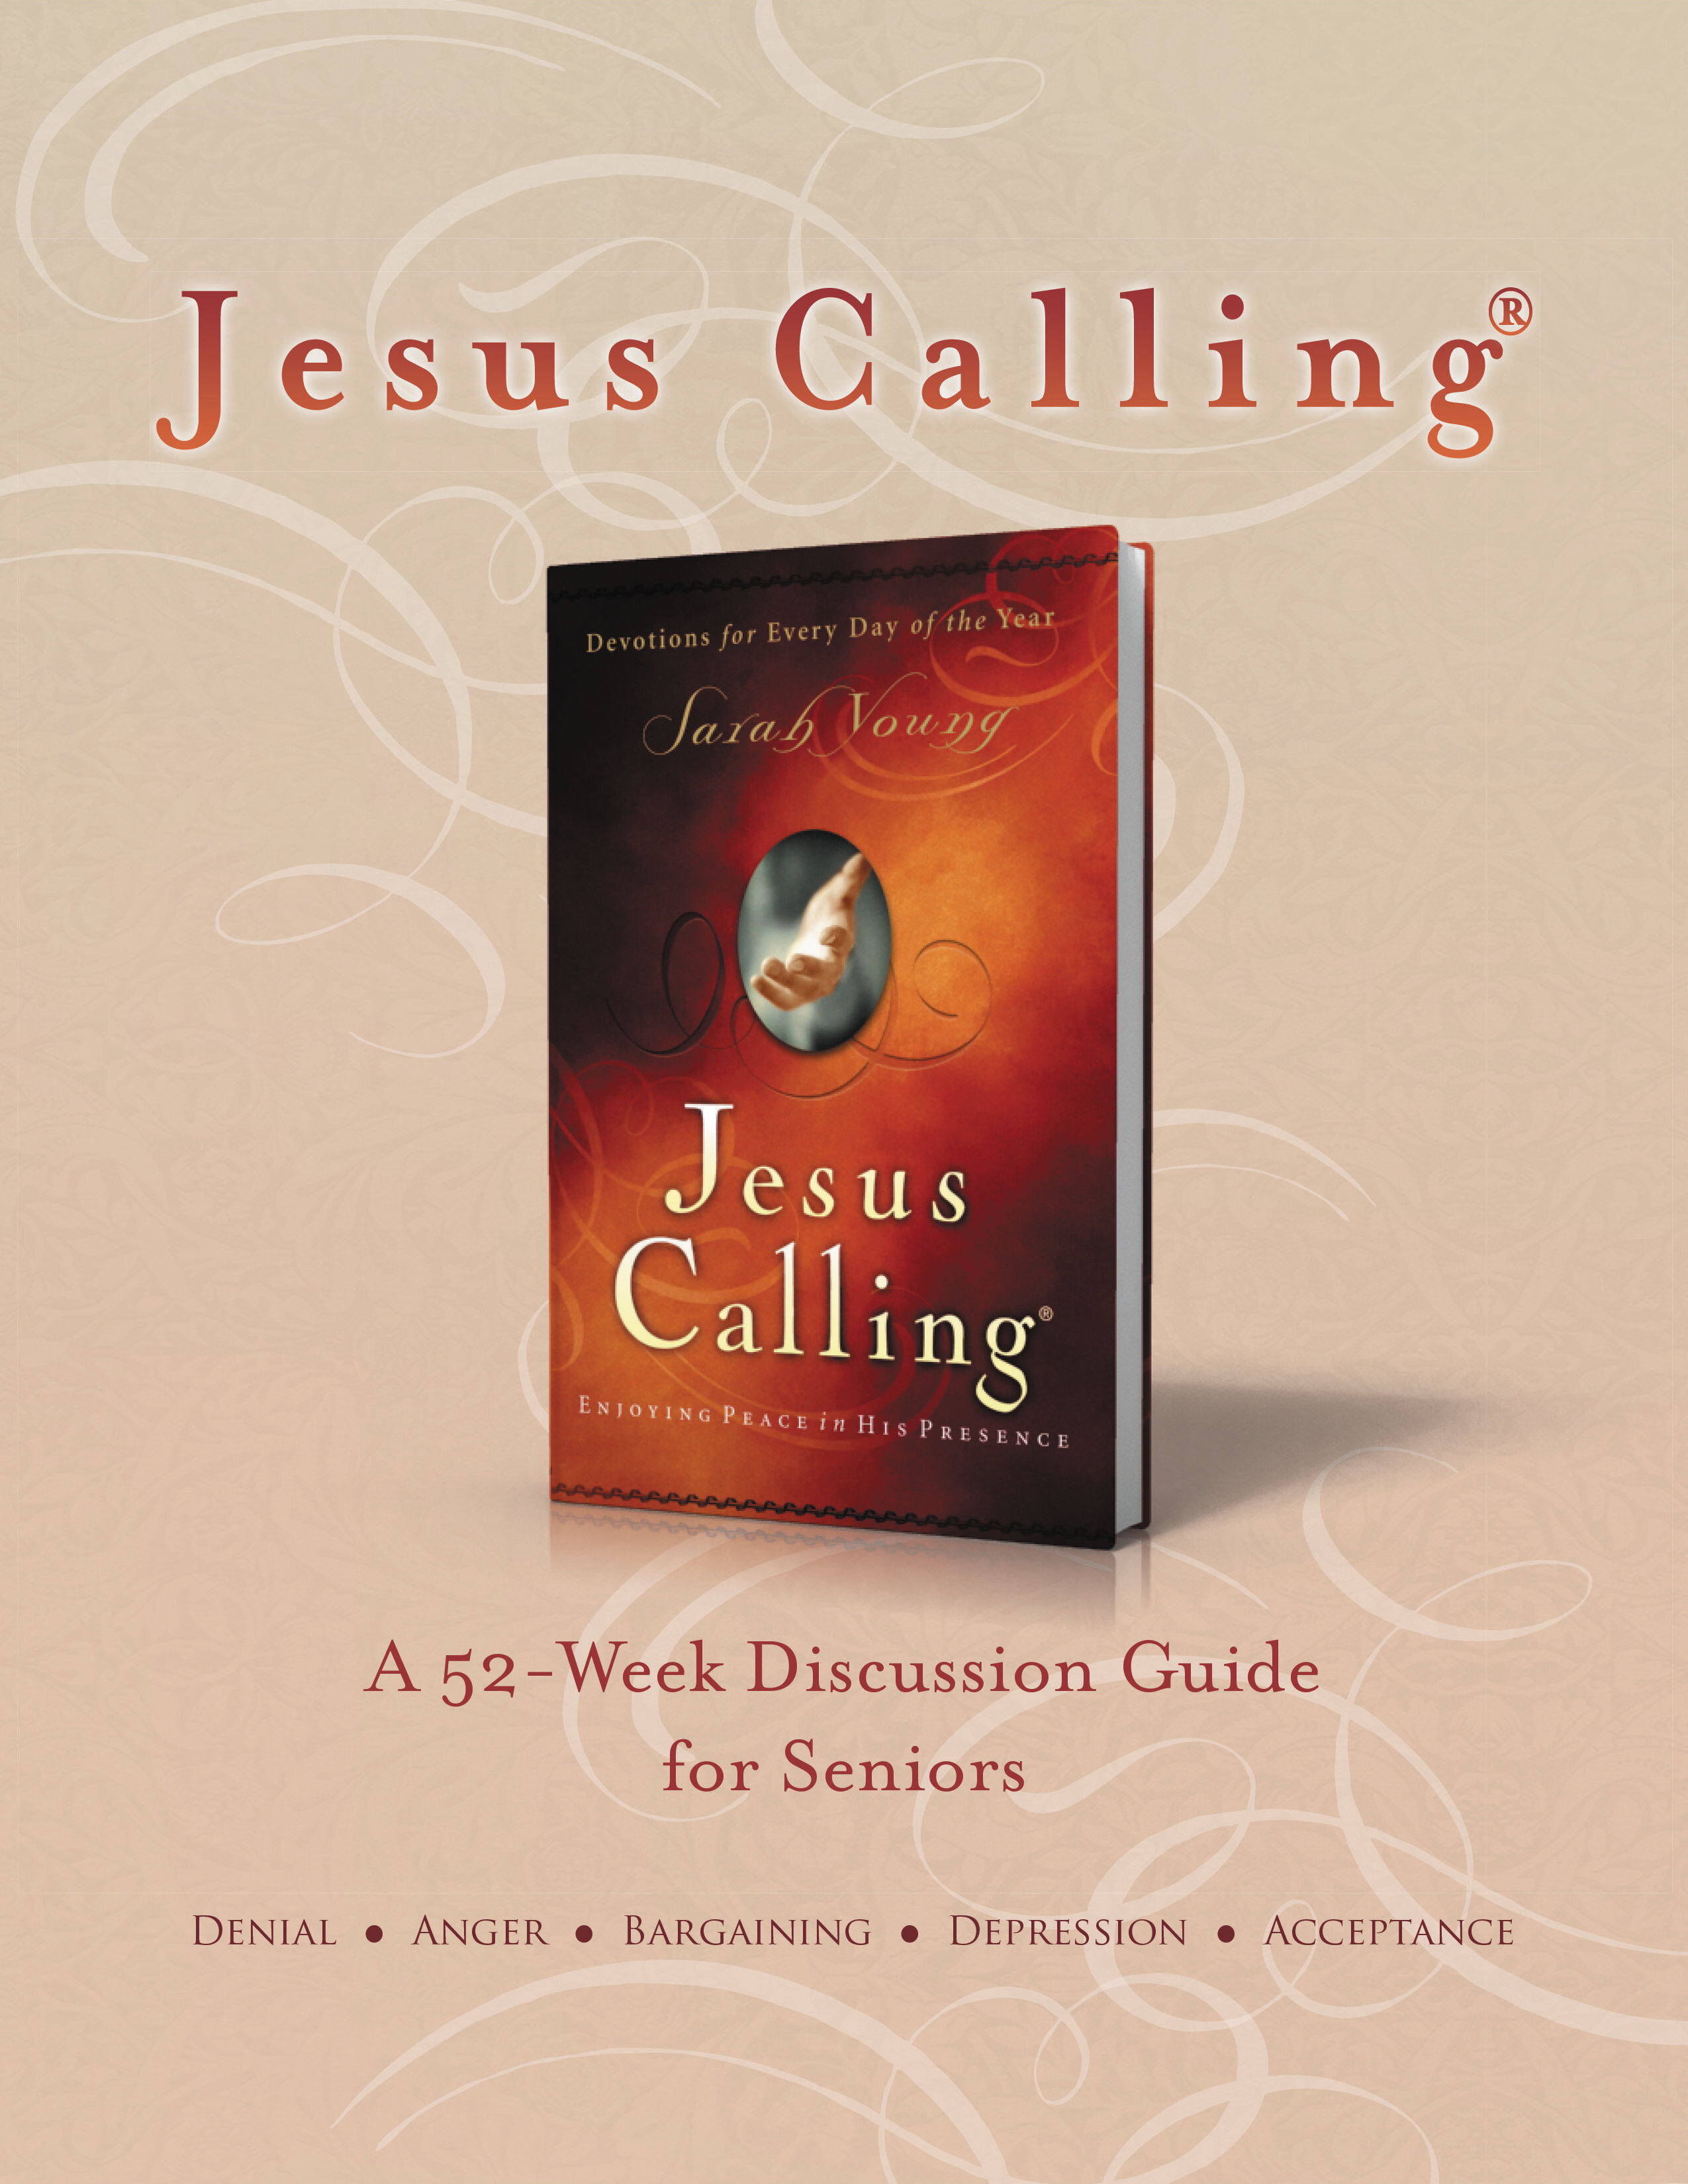 Jesus Calling Book Club Discussion Guide for Seniors Logos Bible Software